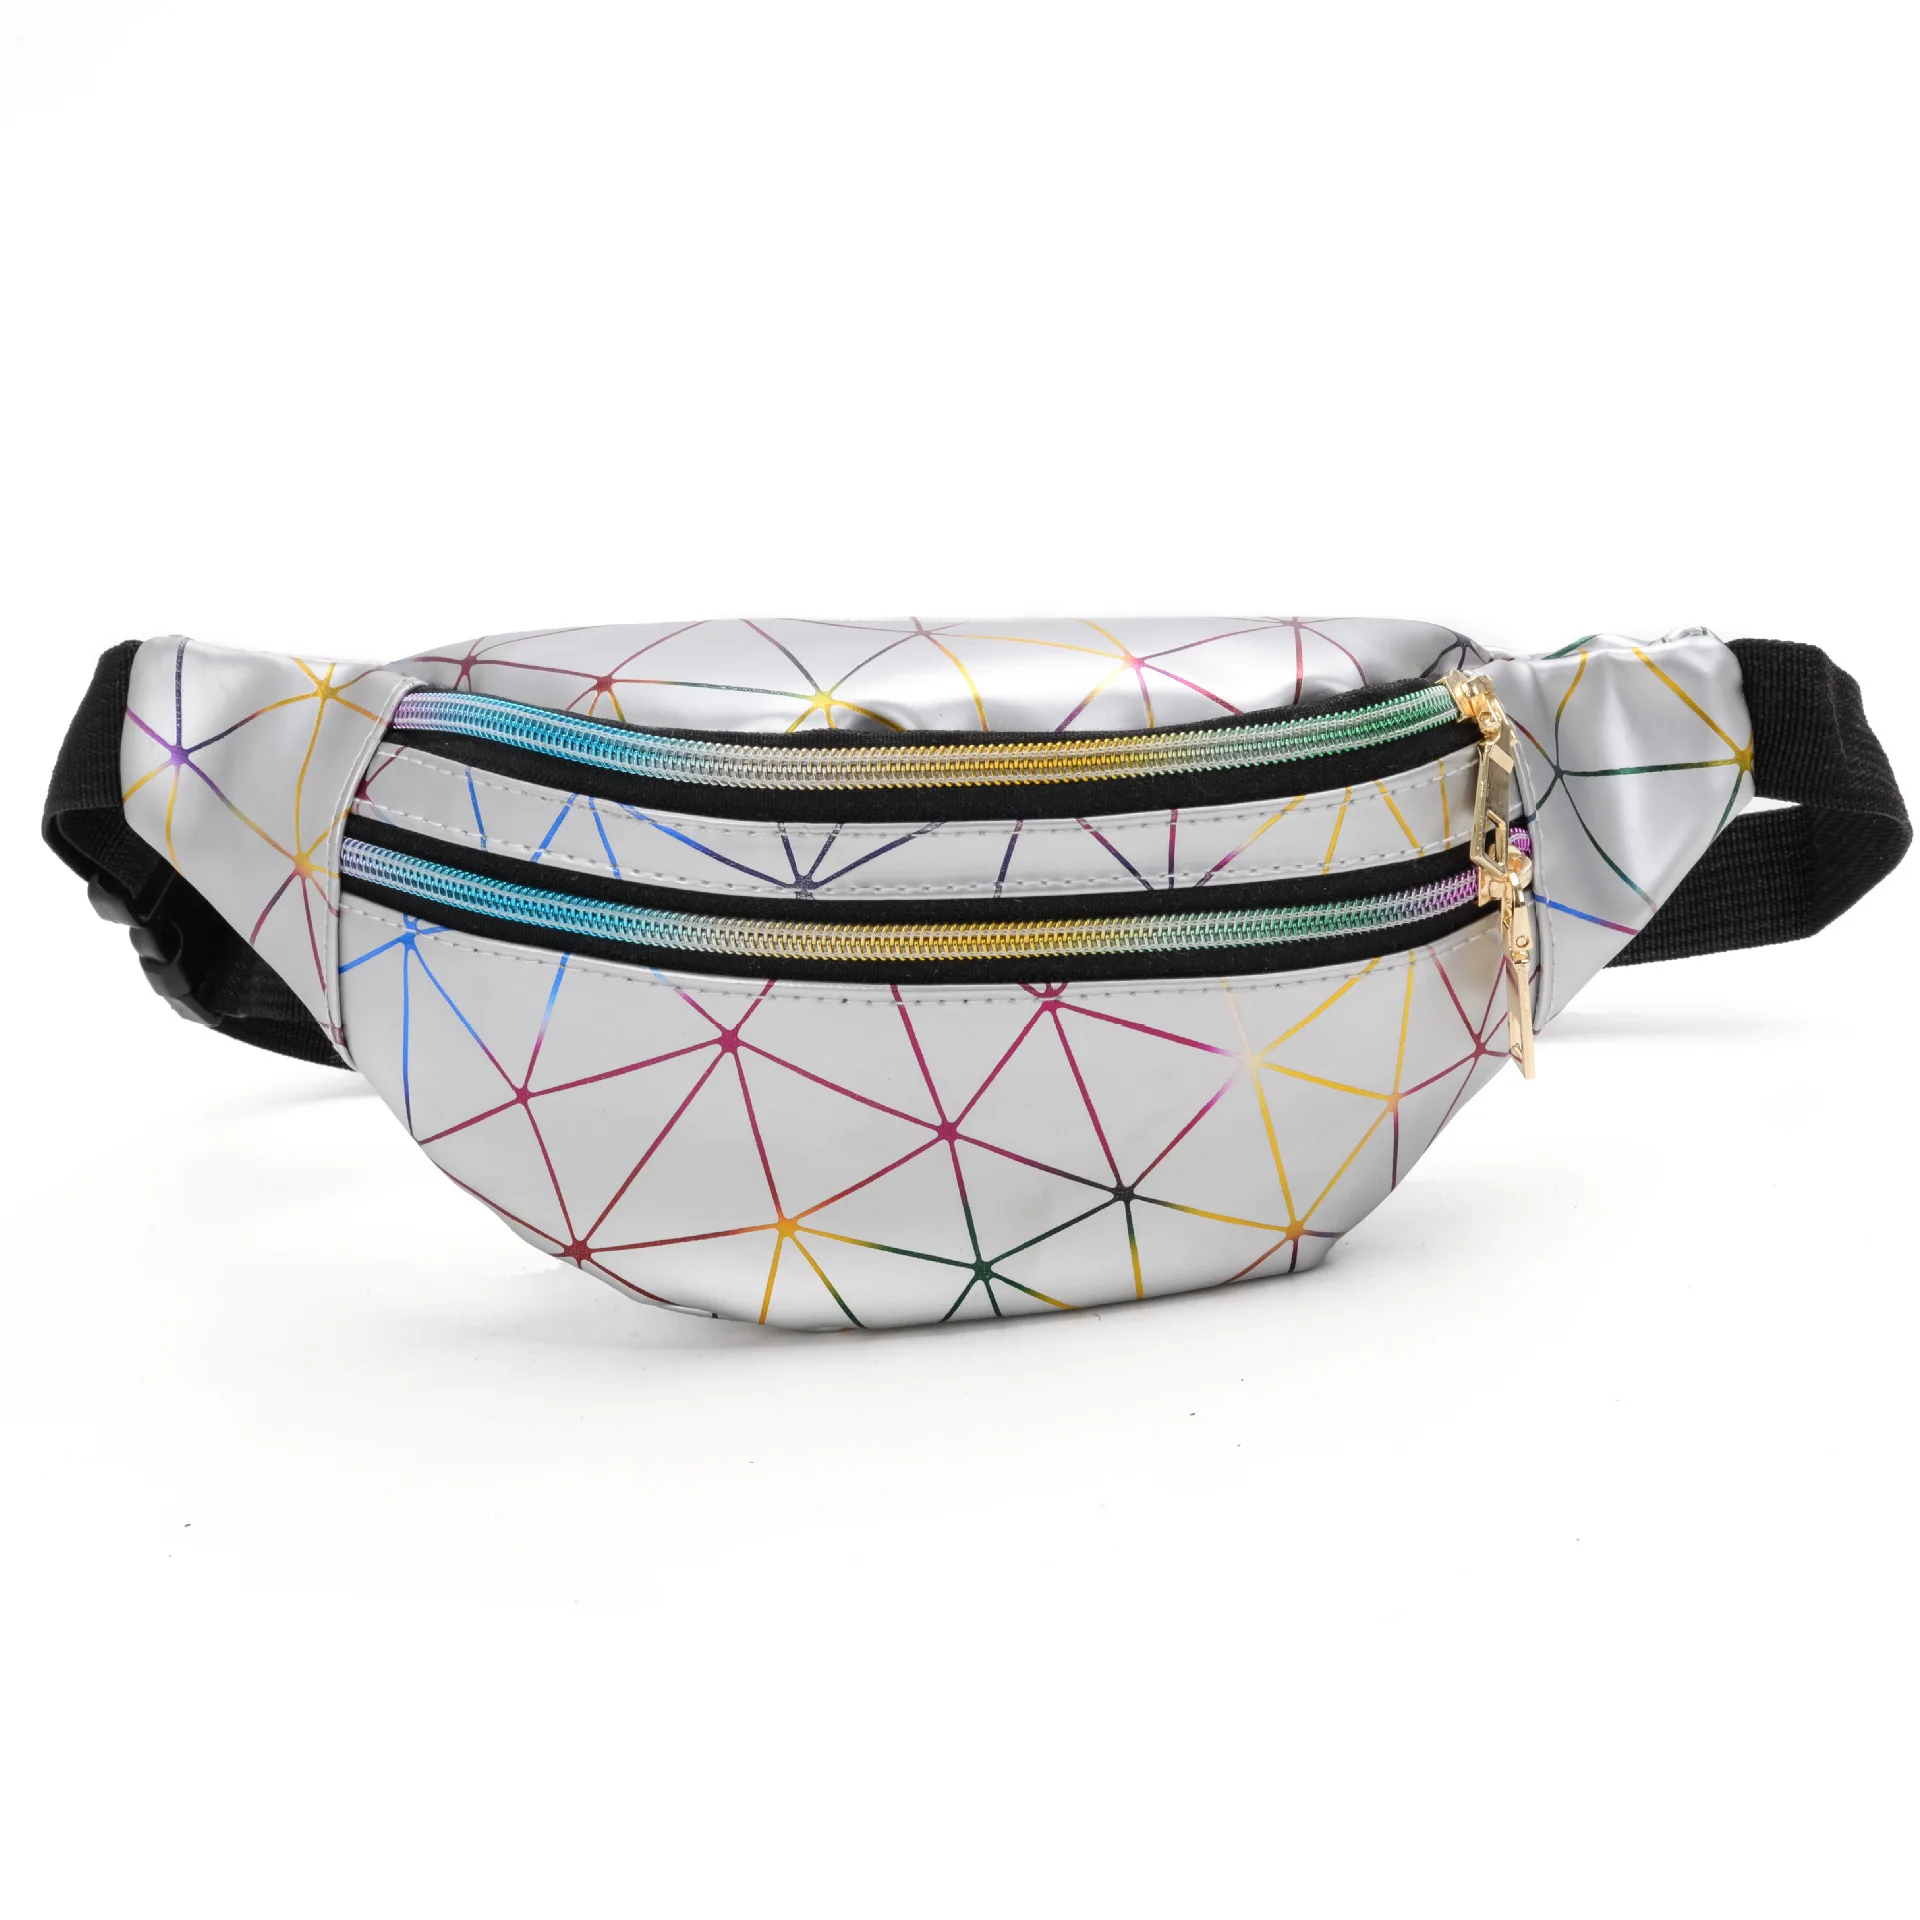 

Promotional Factory Price Custom Ready to Ship Fashion Holographic Women Silver Fanny Pack Female Belt Bag Waist Bag for Lady